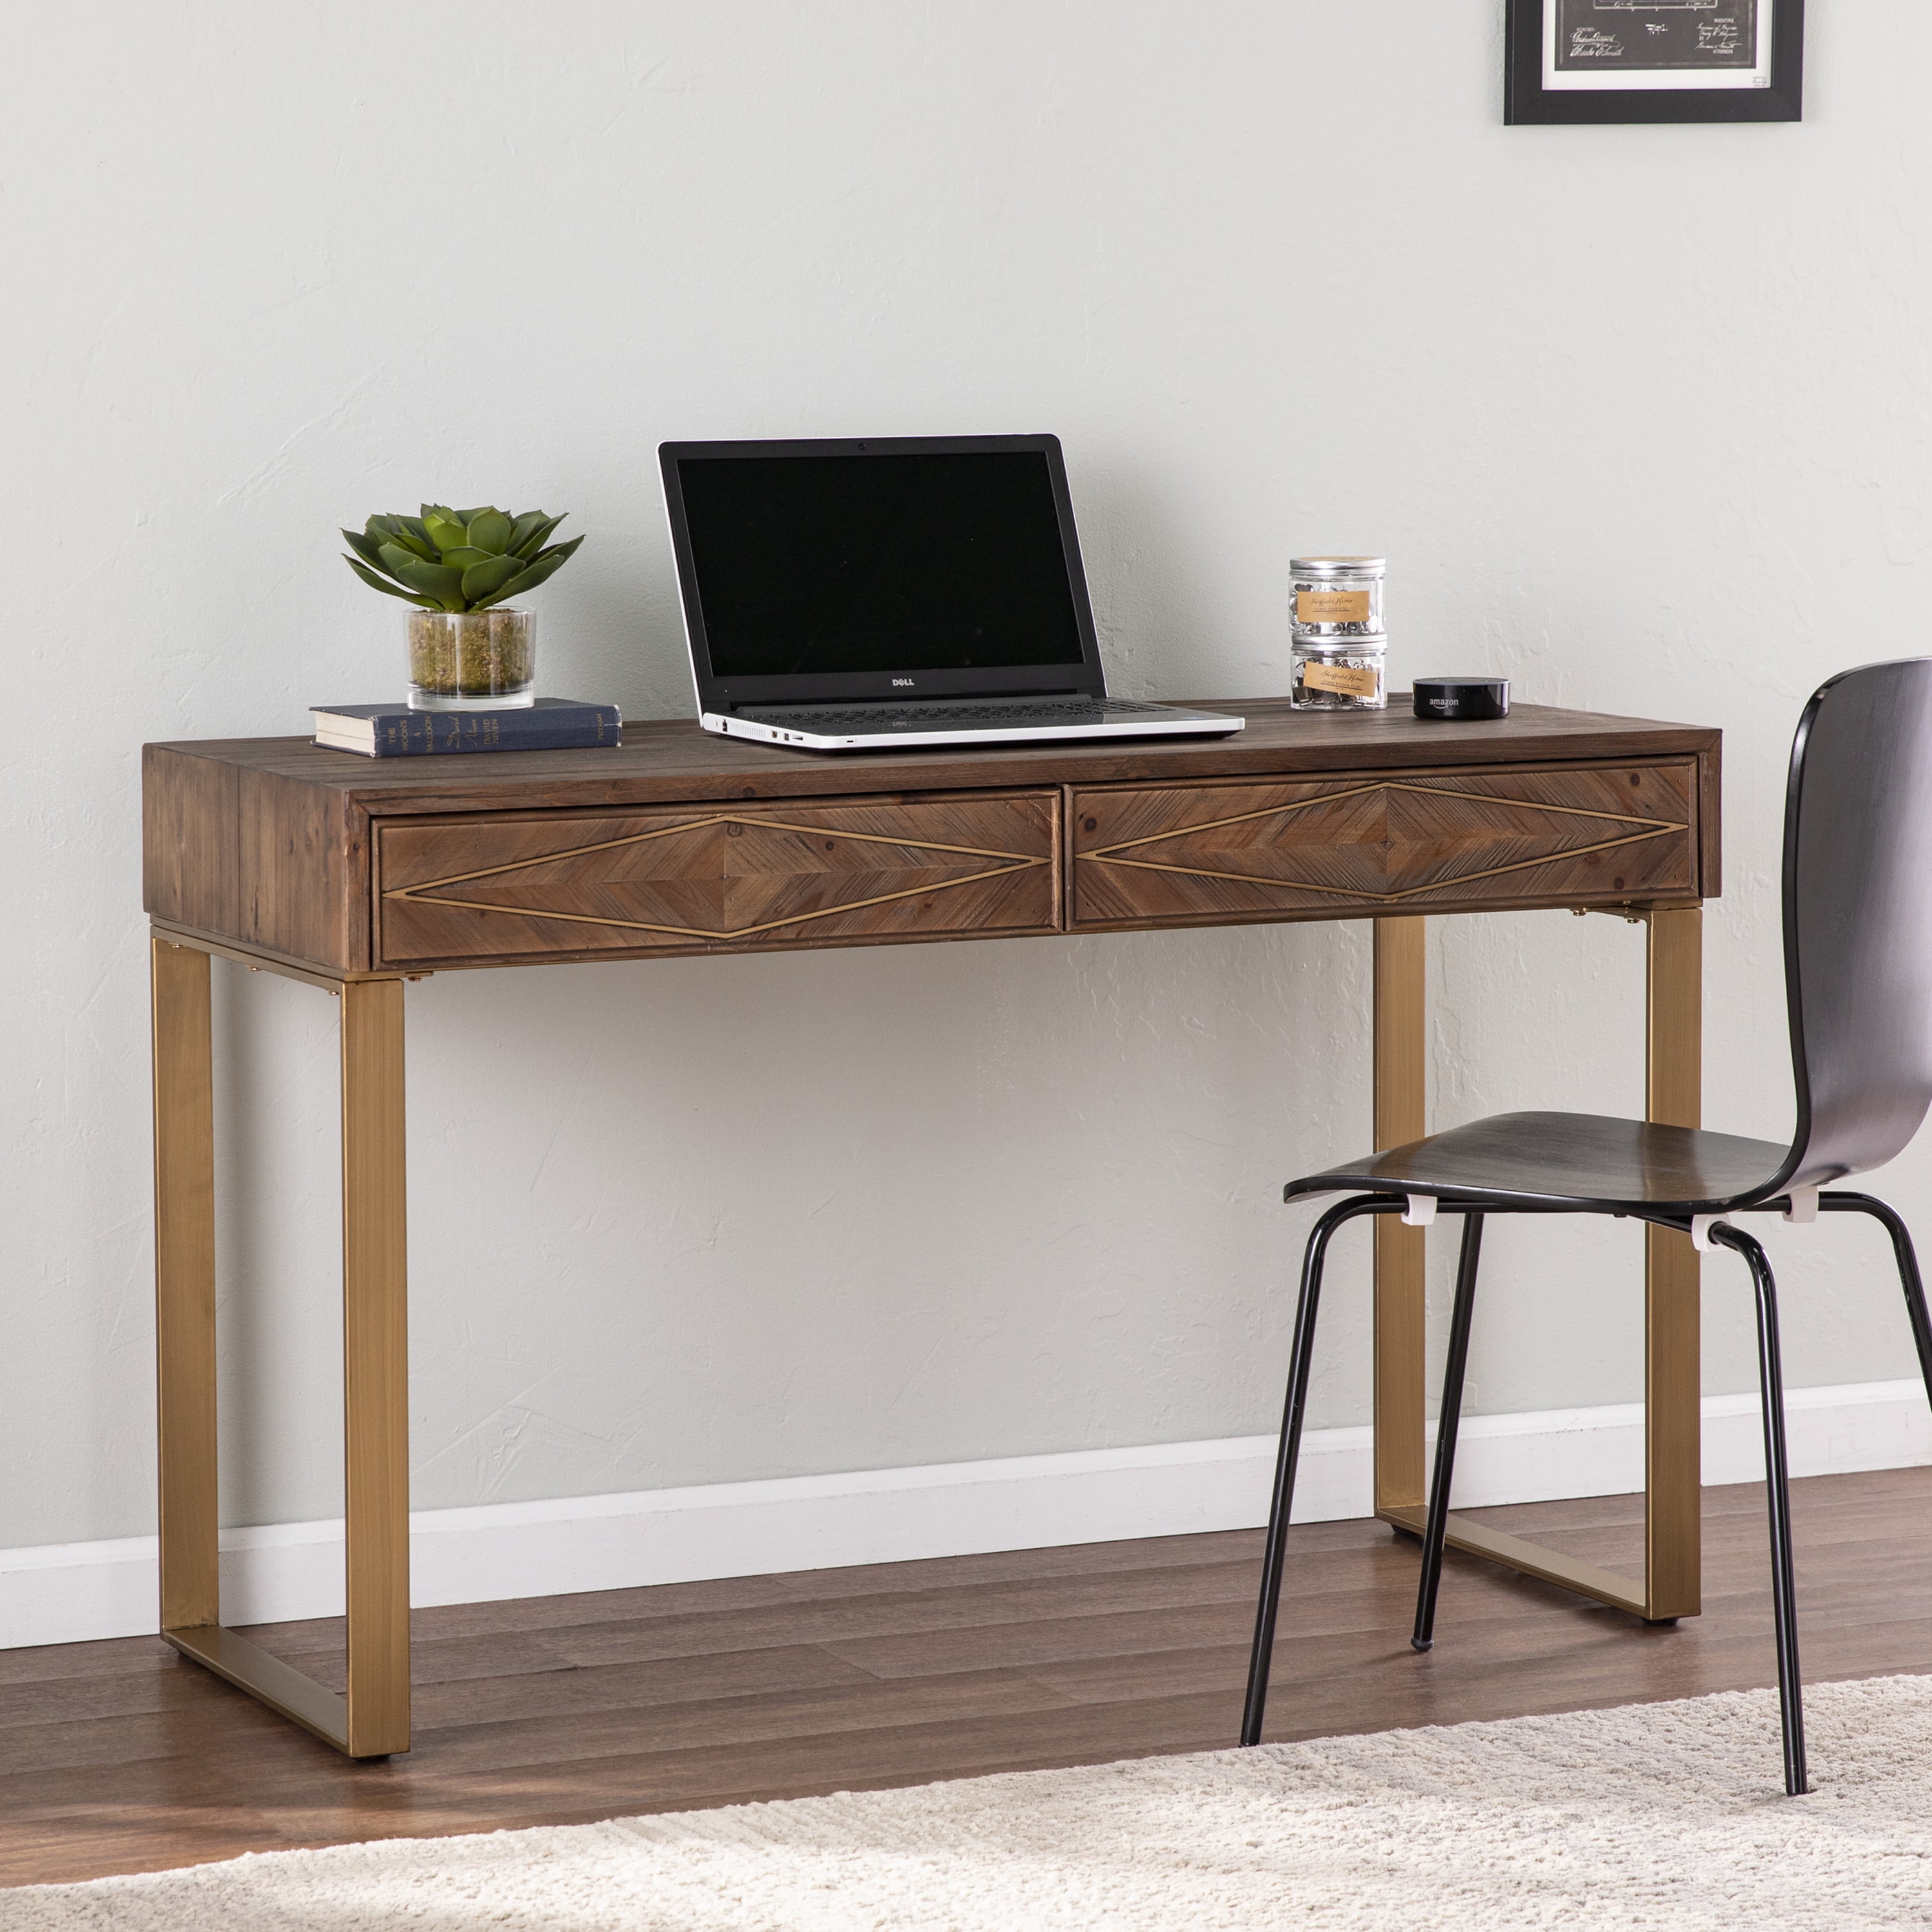 Southern Enterprises Aurial Contemporary Style Reclaimed Wood Desk